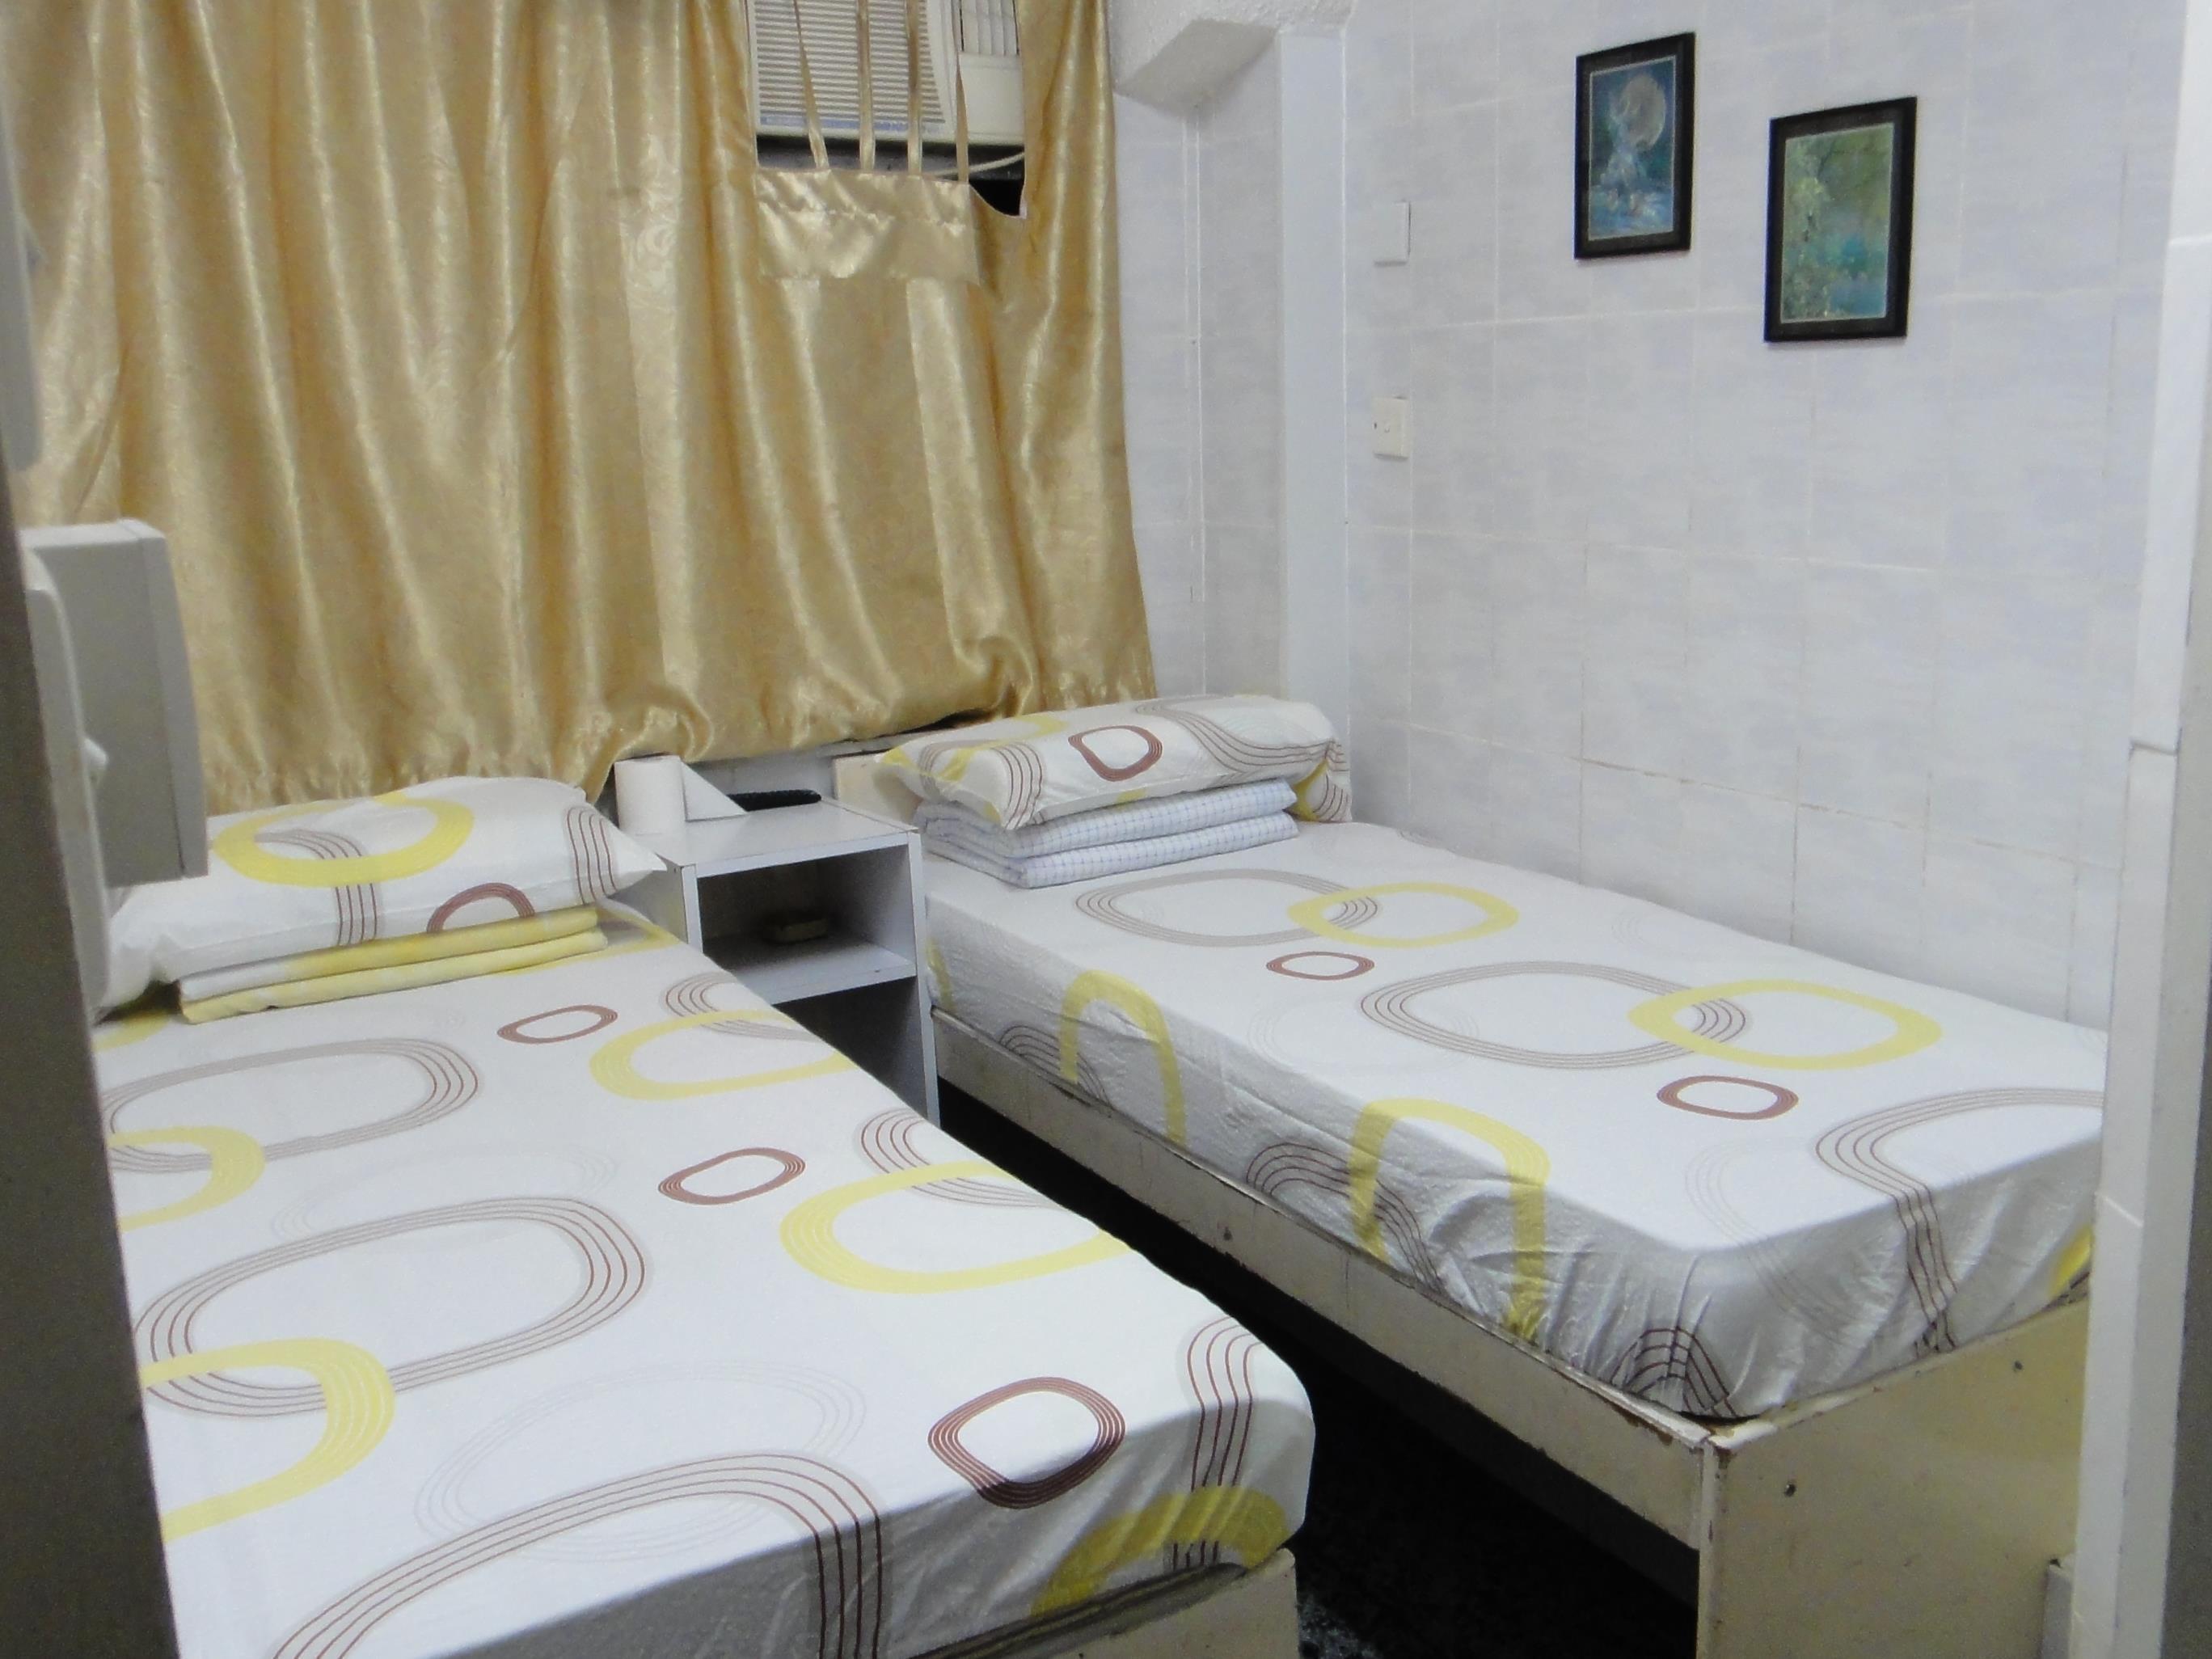 Sunflower Guest House Hong Kong FAQ 2016, What facilities are there in Sunflower Guest House Hong Kong 2016, What Languages Spoken are Supported in Sunflower Guest House Hong Kong 2016, Which payment cards are accepted in Sunflower Guest House Hong Kong , Hong Kong Sunflower Guest House room facilities and services Q&A 2016, Hong Kong Sunflower Guest House online booking services 2016, Hong Kong Sunflower Guest House address 2016, Hong Kong Sunflower Guest House telephone number 2016,Hong Kong Sunflower Guest House map 2016, Hong Kong Sunflower Guest House traffic guide 2016, how to go Hong Kong Sunflower Guest House, Hong Kong Sunflower Guest House booking online 2016, Hong Kong Sunflower Guest House room types 2016.